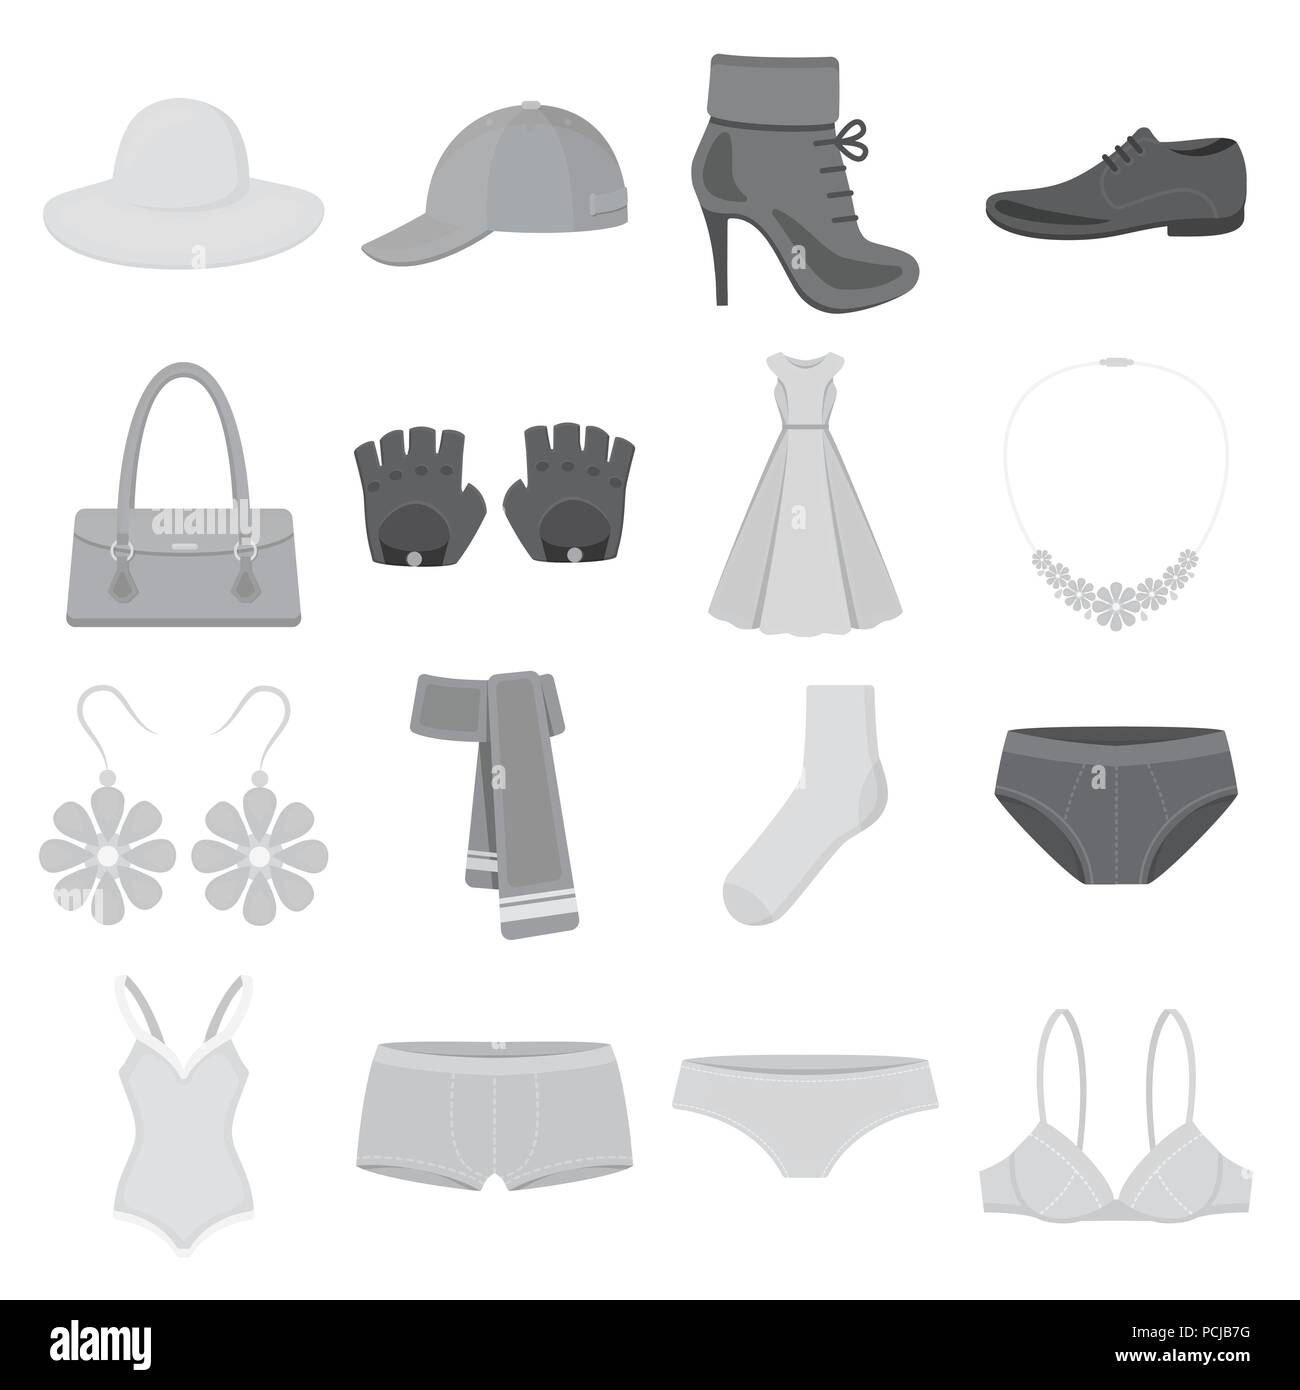 Collection of fashion accessories women things Vector Image